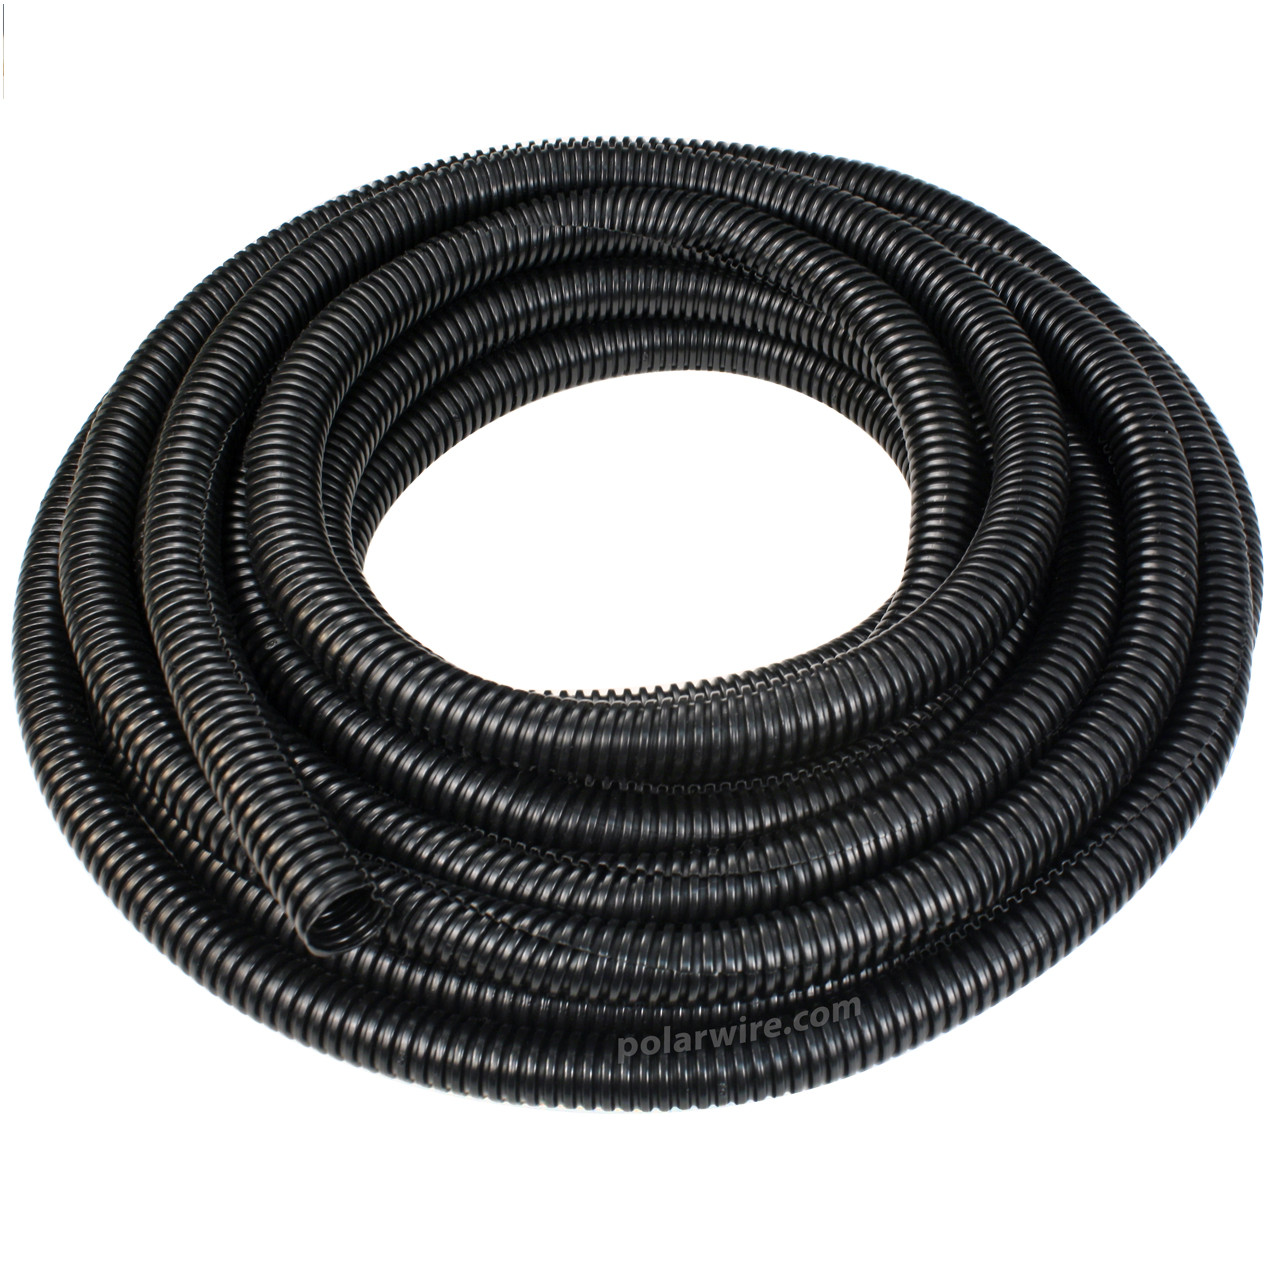 1/2 inch convoluted polyethylene split loom wraps wire bundles and protects against crushing, abrasion, and other damage